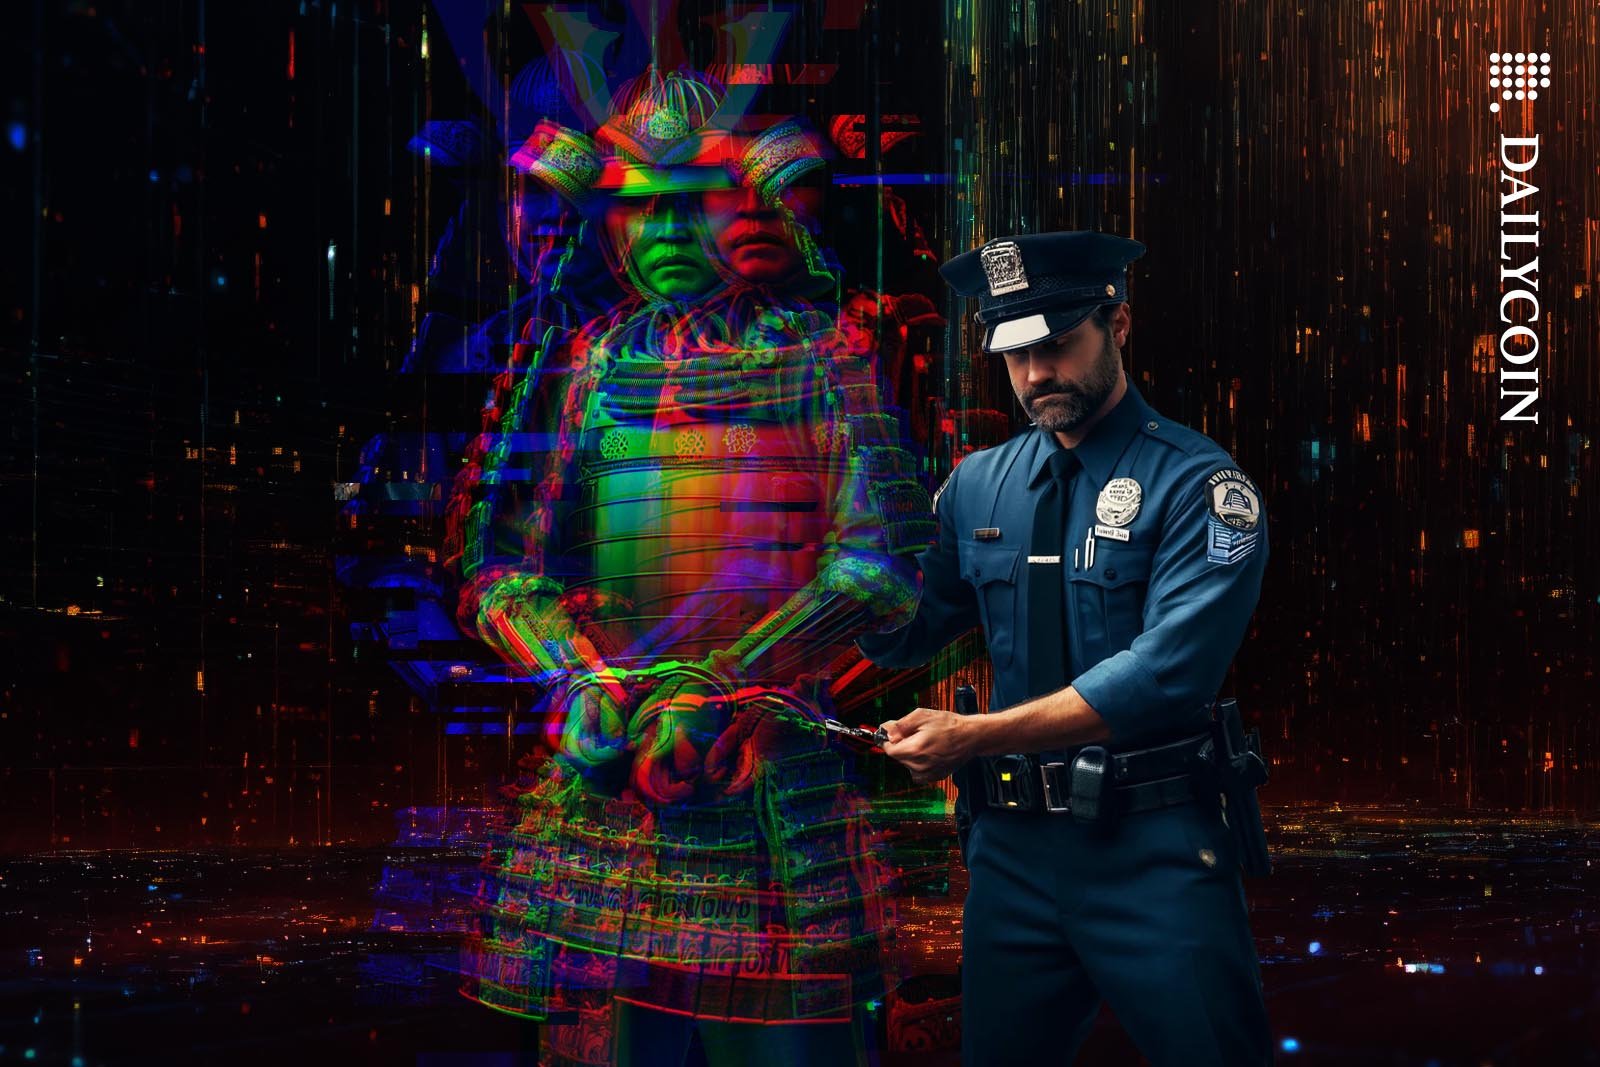 A digital Samurai being arrested by a policeman.